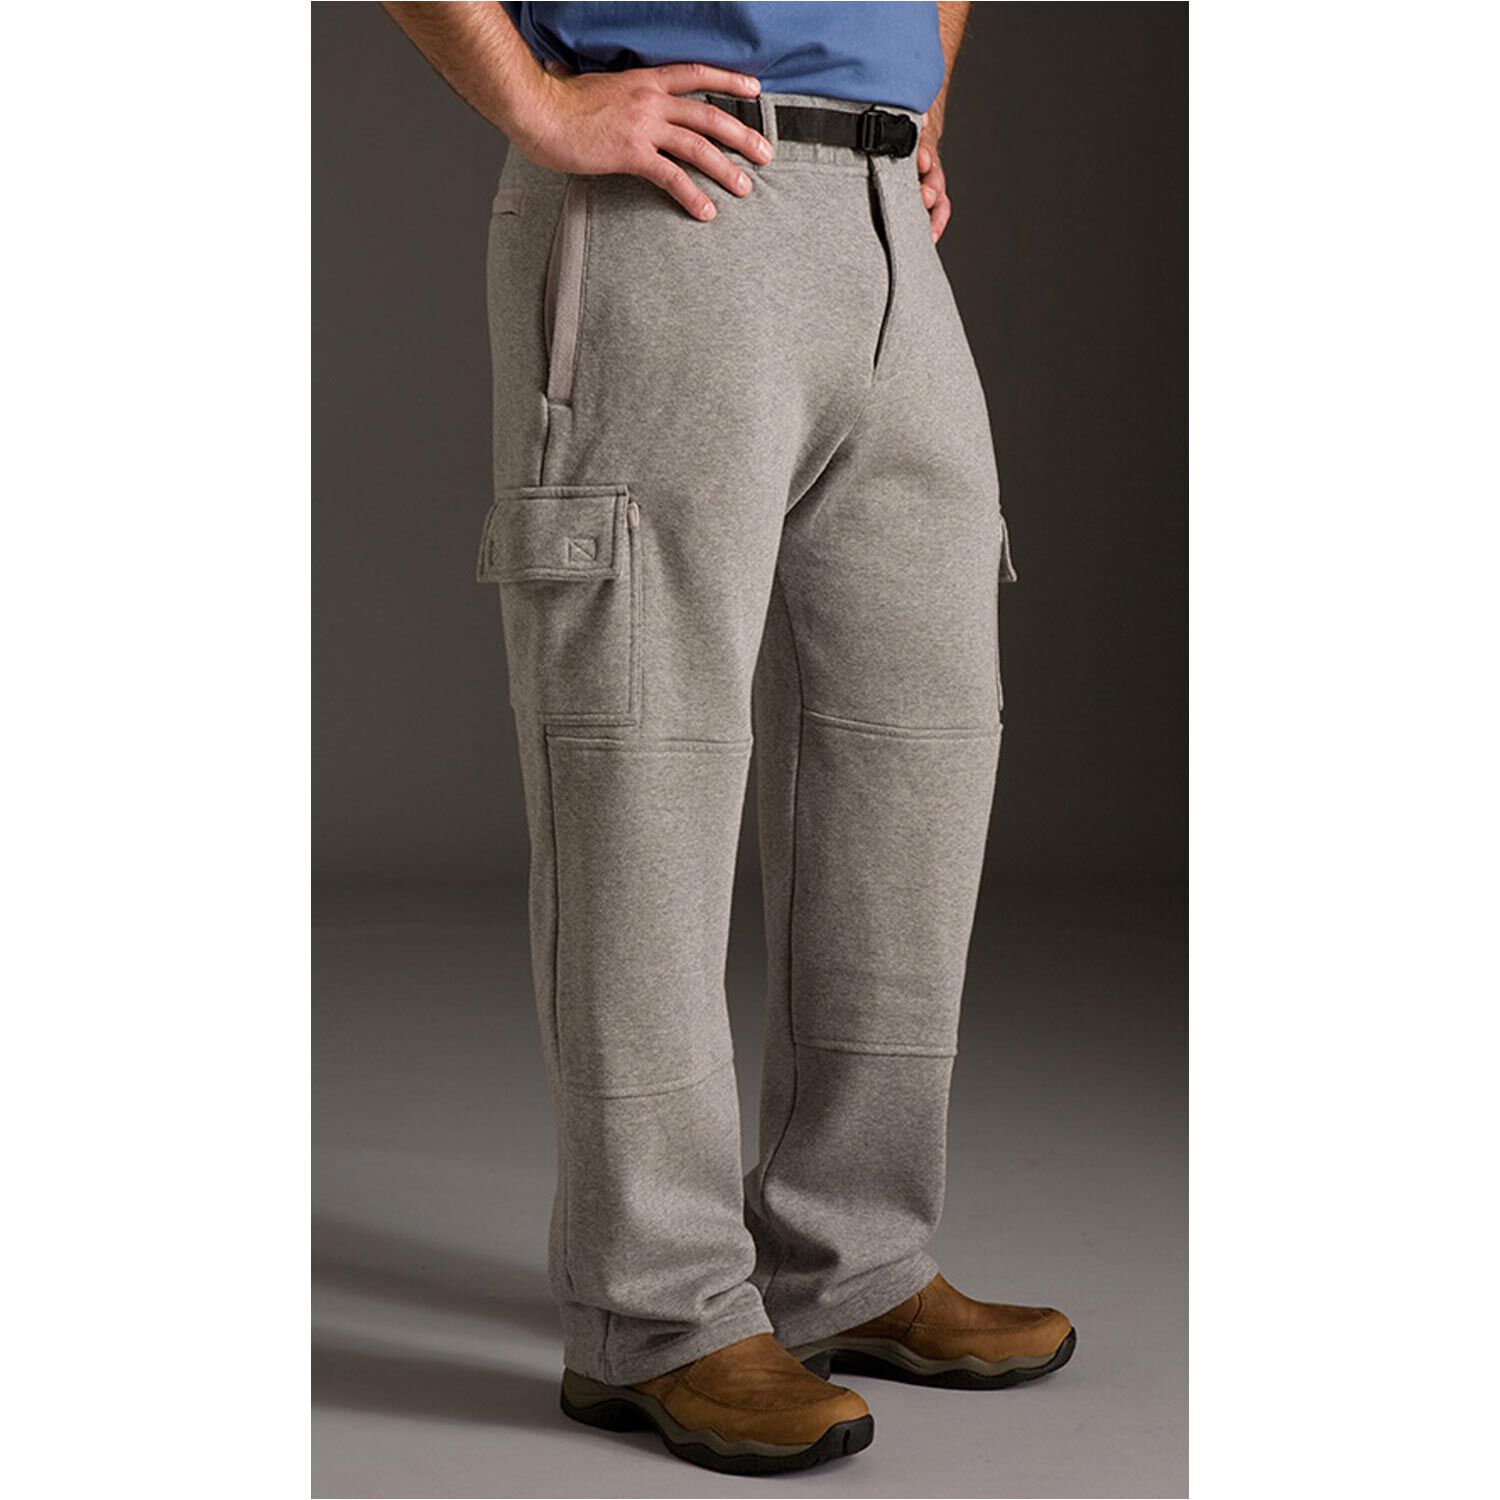 RANDY 22AW Muscle 2 Cargo pocket pants 2 -